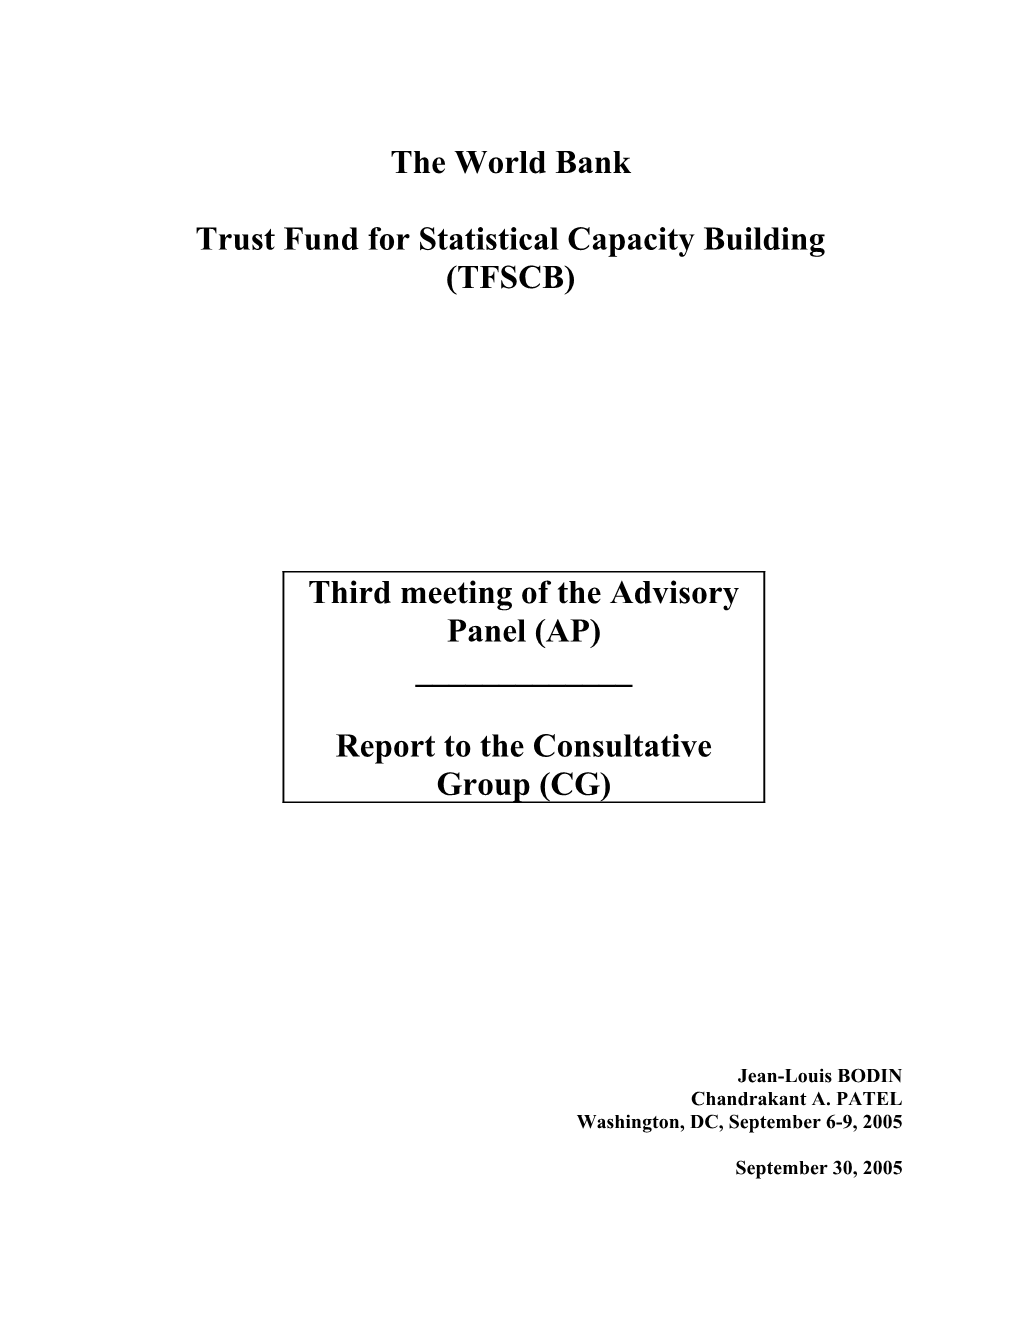 The World Bank s3